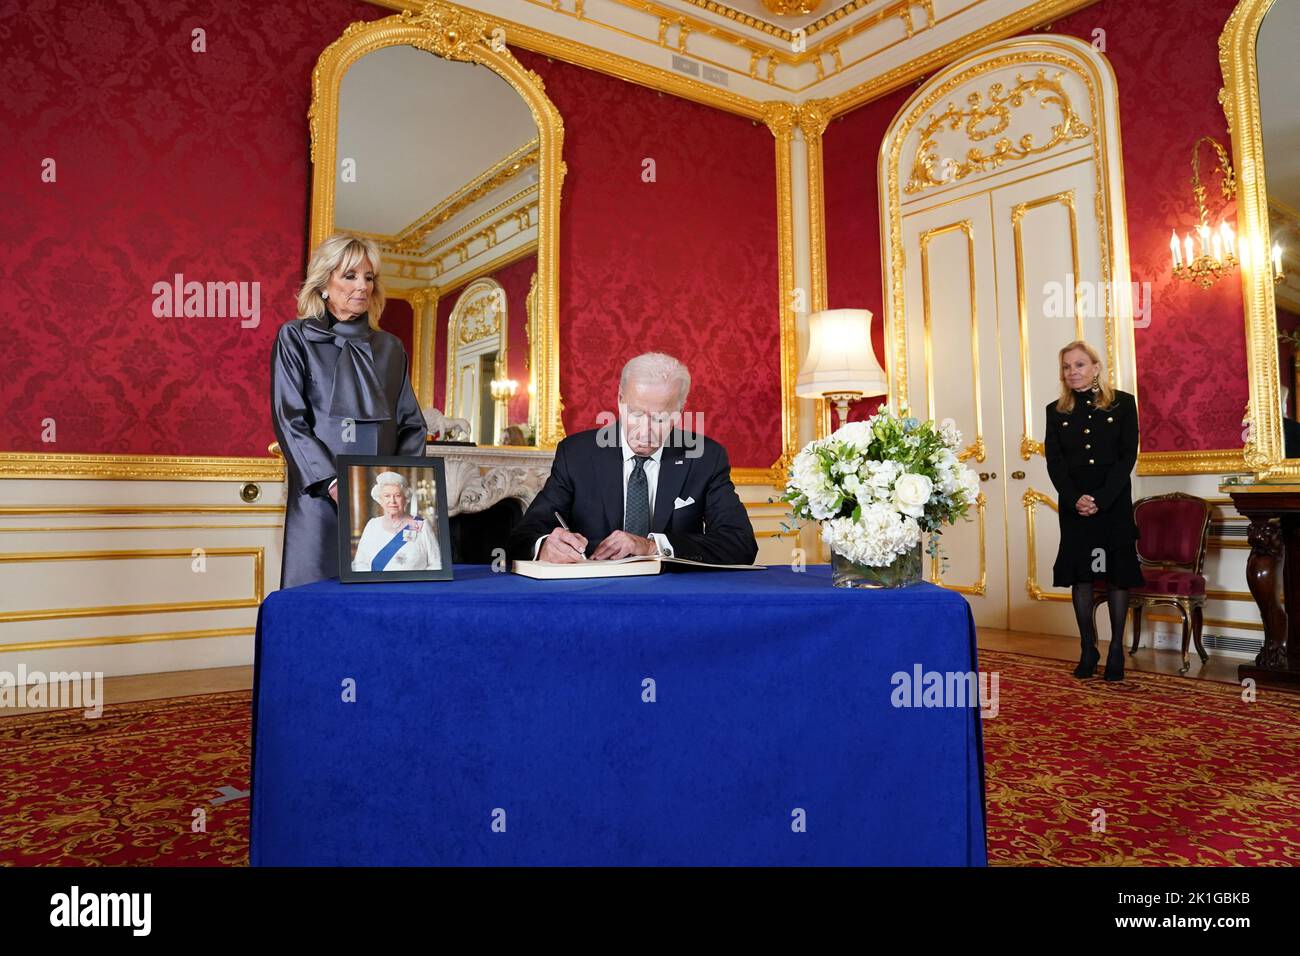 U.S. President Joe Biden signs a condolence book for Britain's Queen Elizabeth, following her death, at Lancaster House in London, Britain, September 18, 2022. REUTERS/Kevin Lamarque Stock Photo